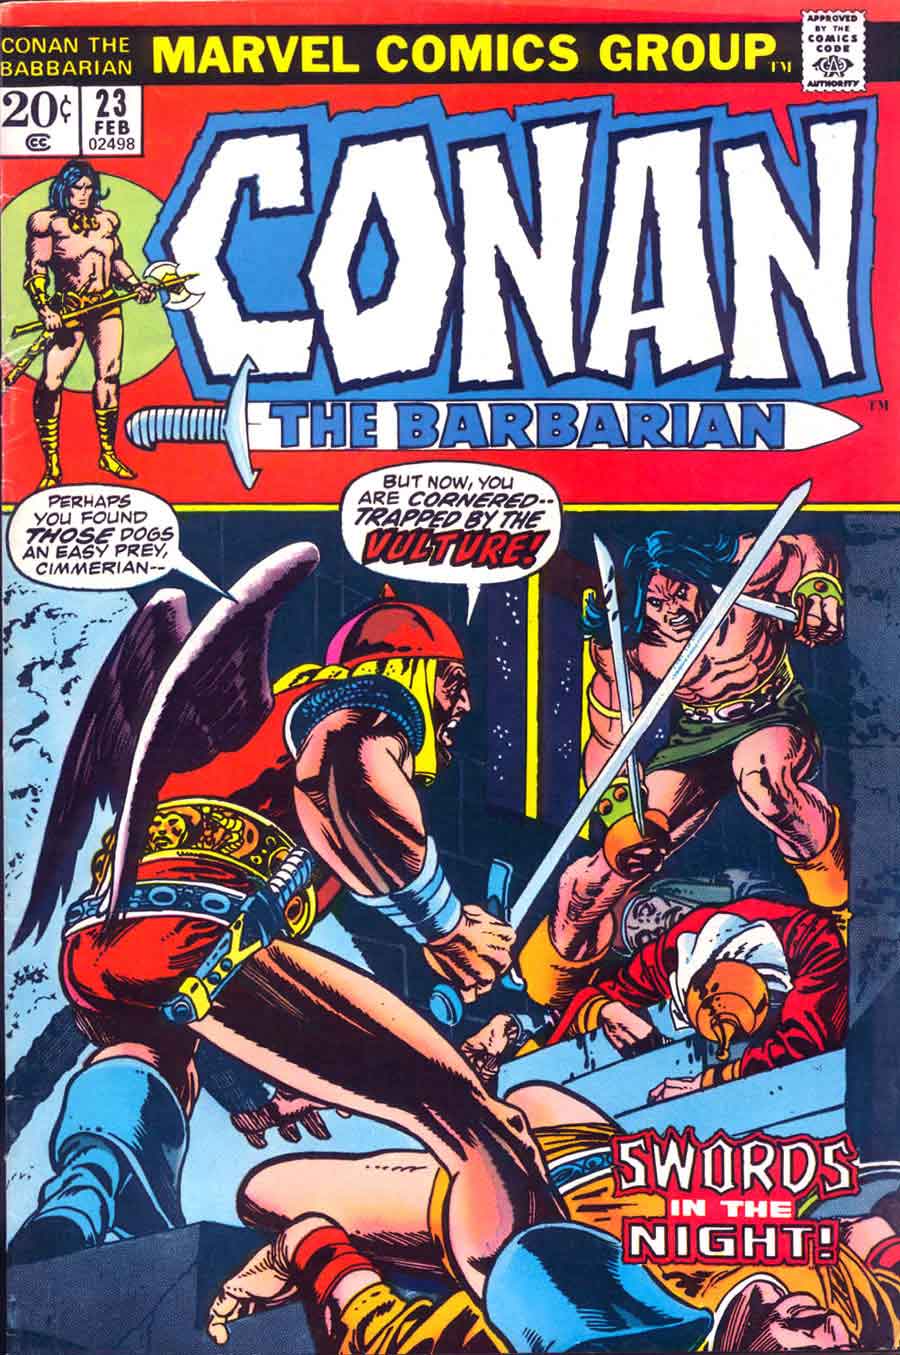 Conan the Barbarian #23 marvel key issue 1970s bronze age comic book cover - 1st appearance Red Sonja